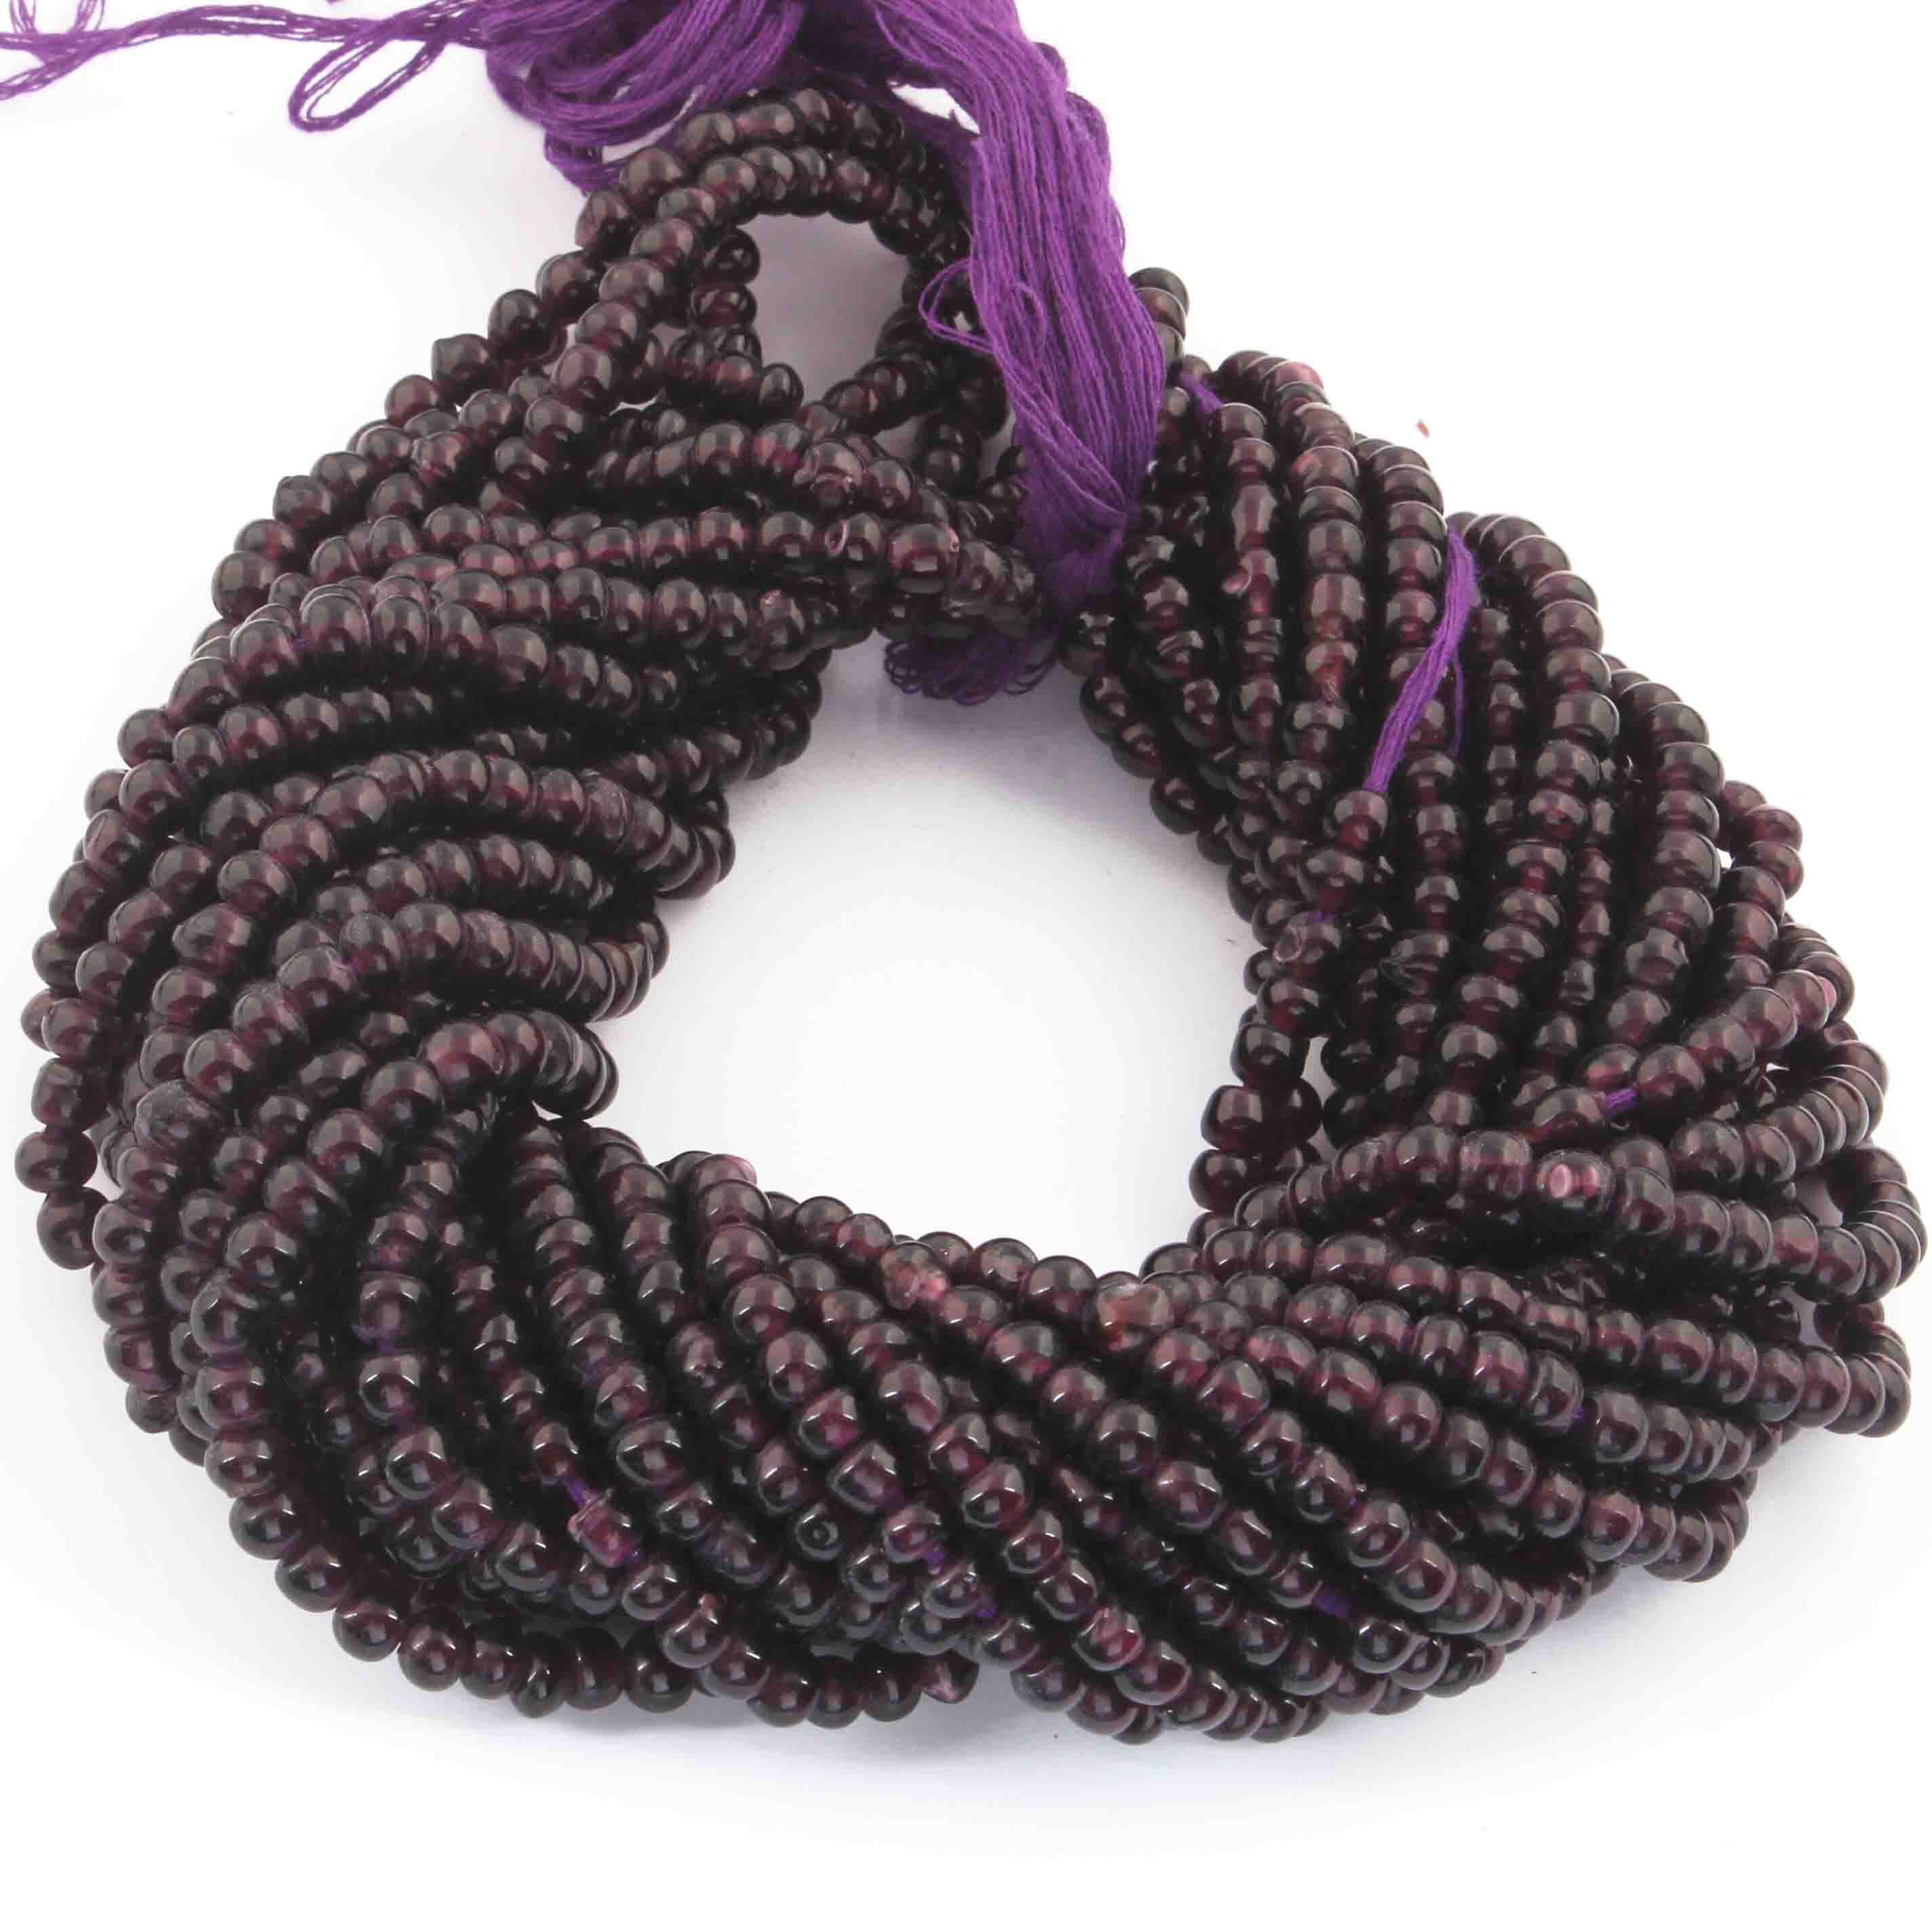 4mm Faceted AAA Natural African Amethyst Rondelle Beads Strand, 13 Inches  Long Strand